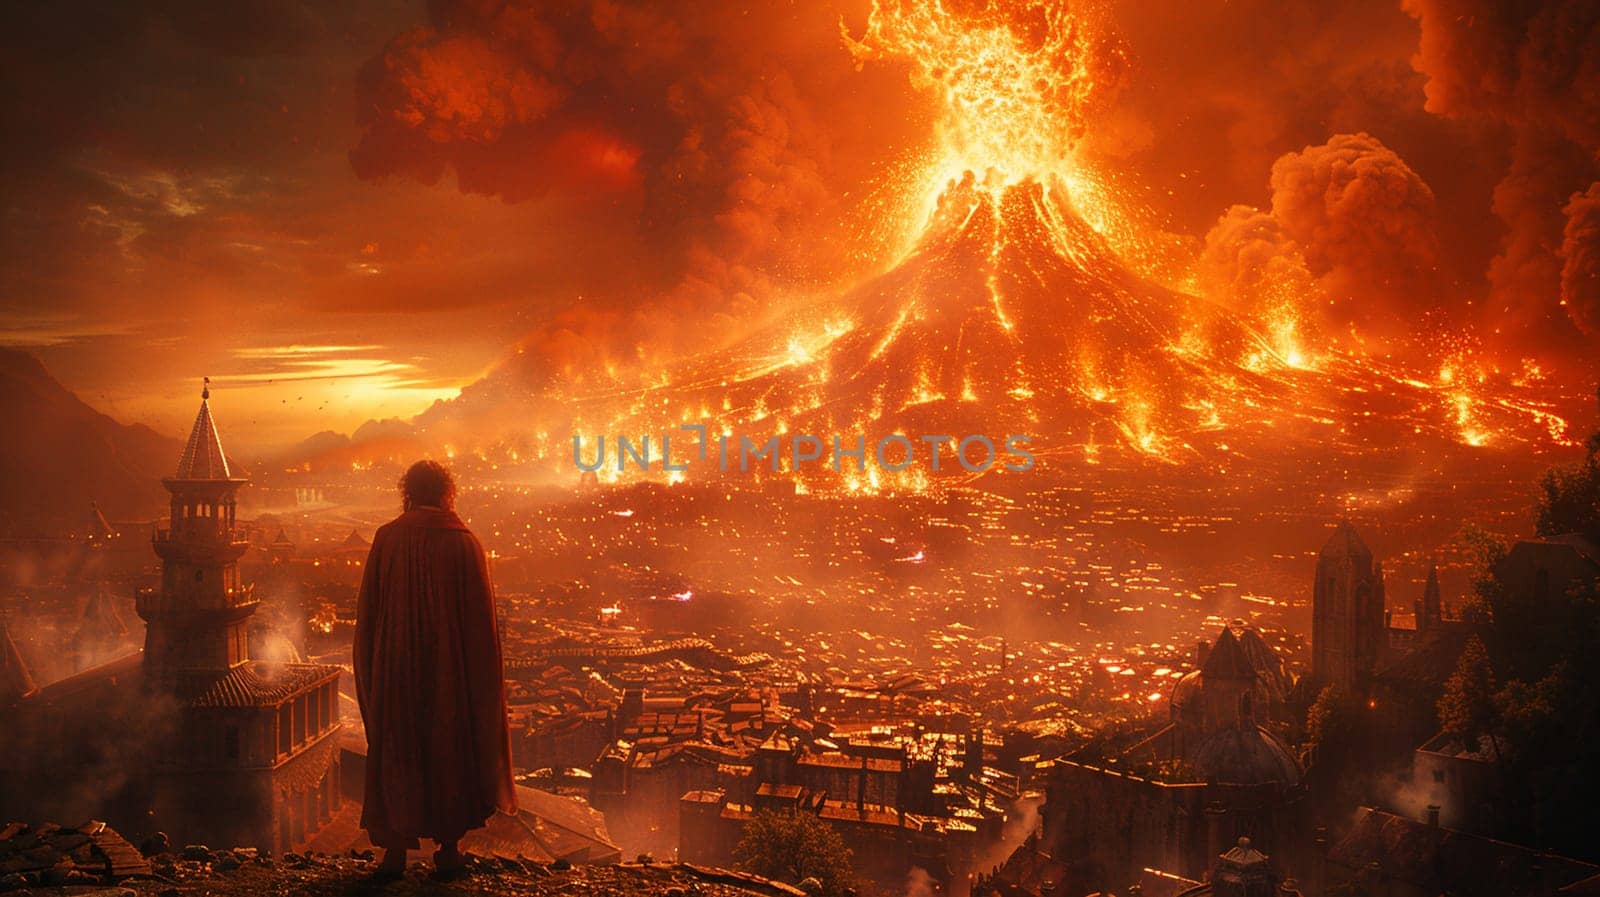 Dramatic scene as man in red cloak watches volcanic eruption devastating historic city under fiery skies. Generative AI